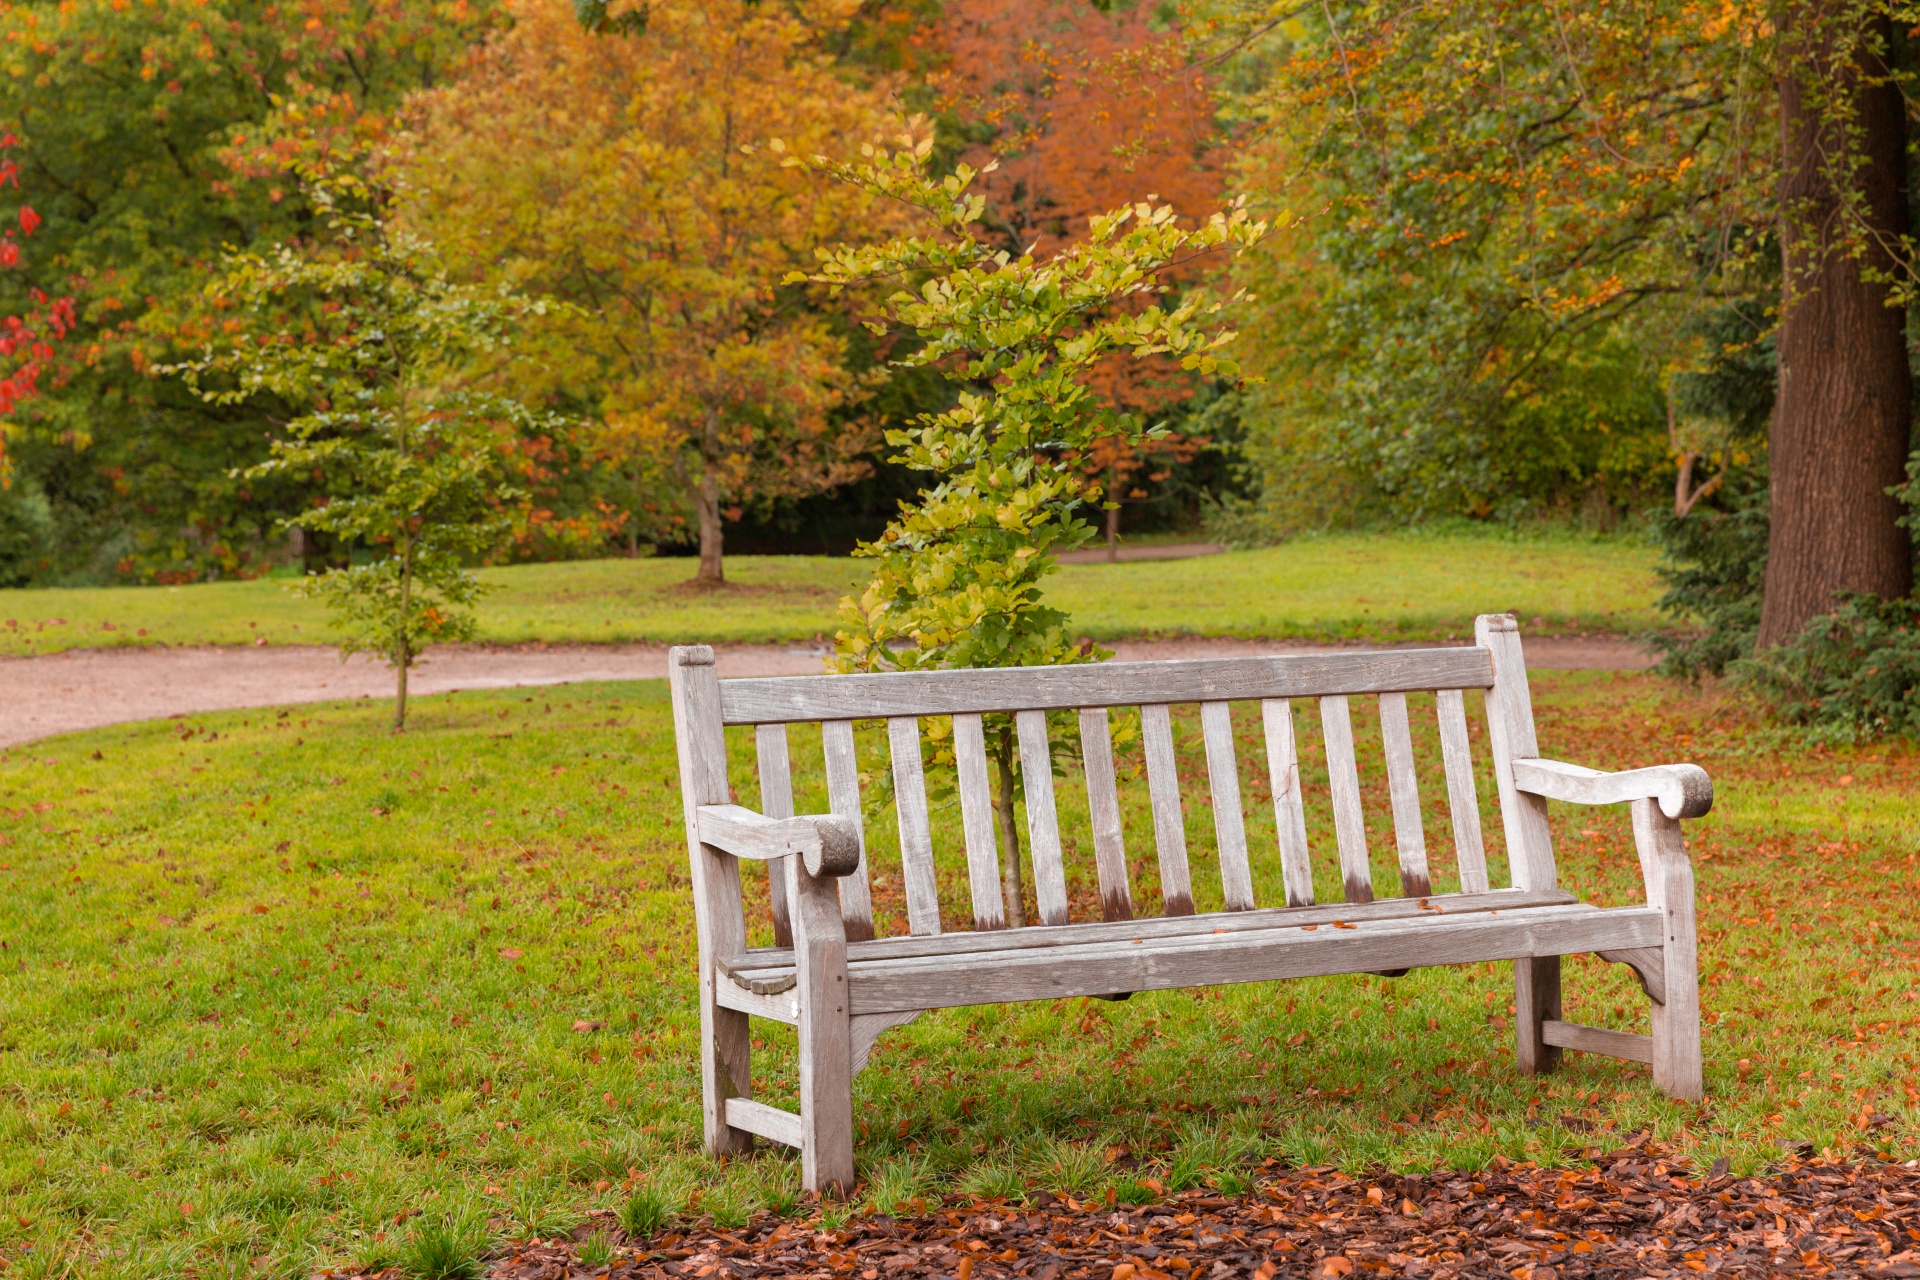 Wooden bench in the park in Autumn